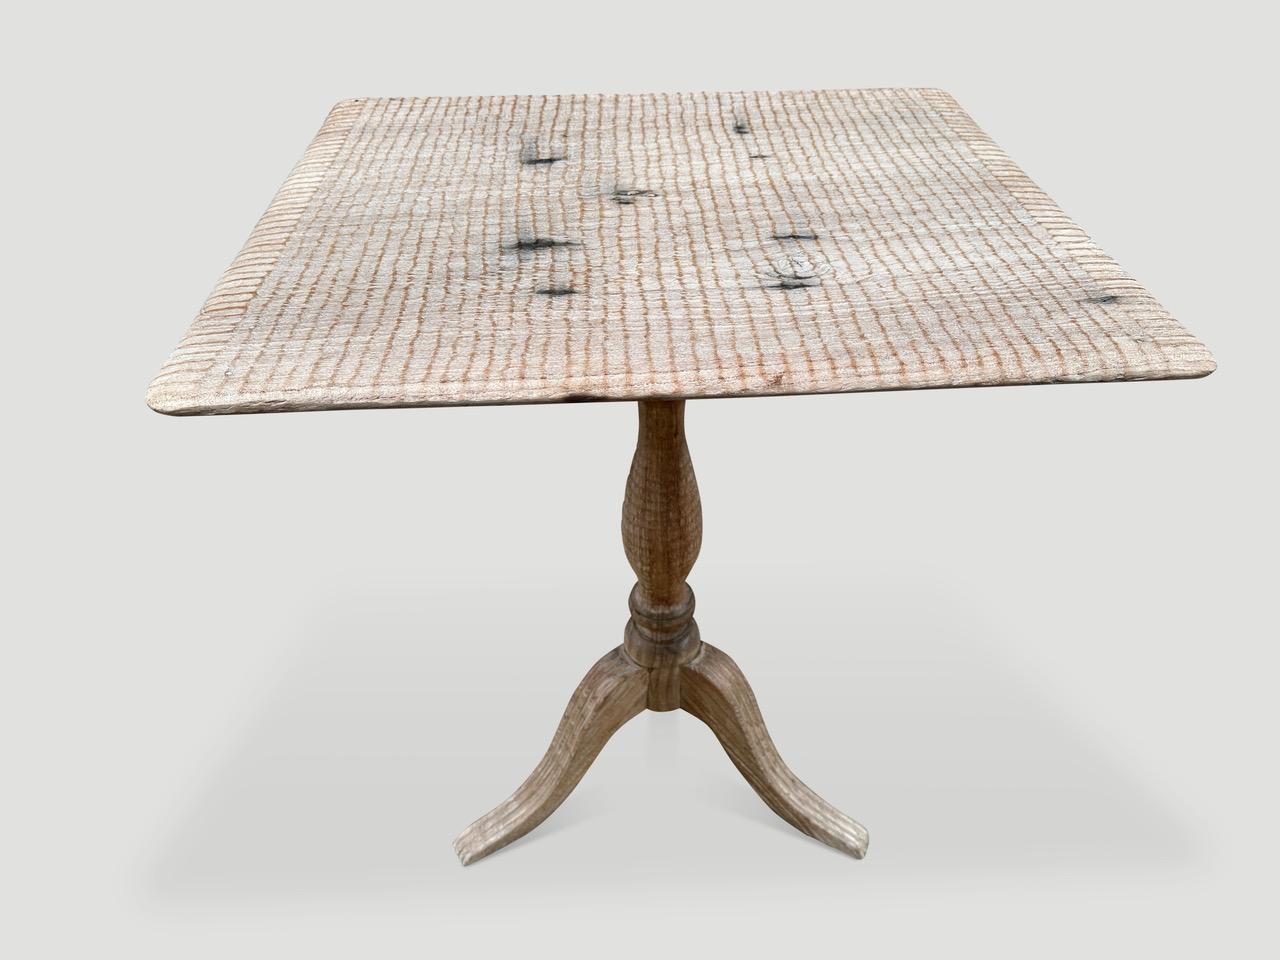 Impressive hand carved legs on this antique side table or entry table. The top is made from a single piece of teak wood and we have added our unique minimalist carving. Finished in a translucent milky tone revealing the beautiful wood grain. It’s